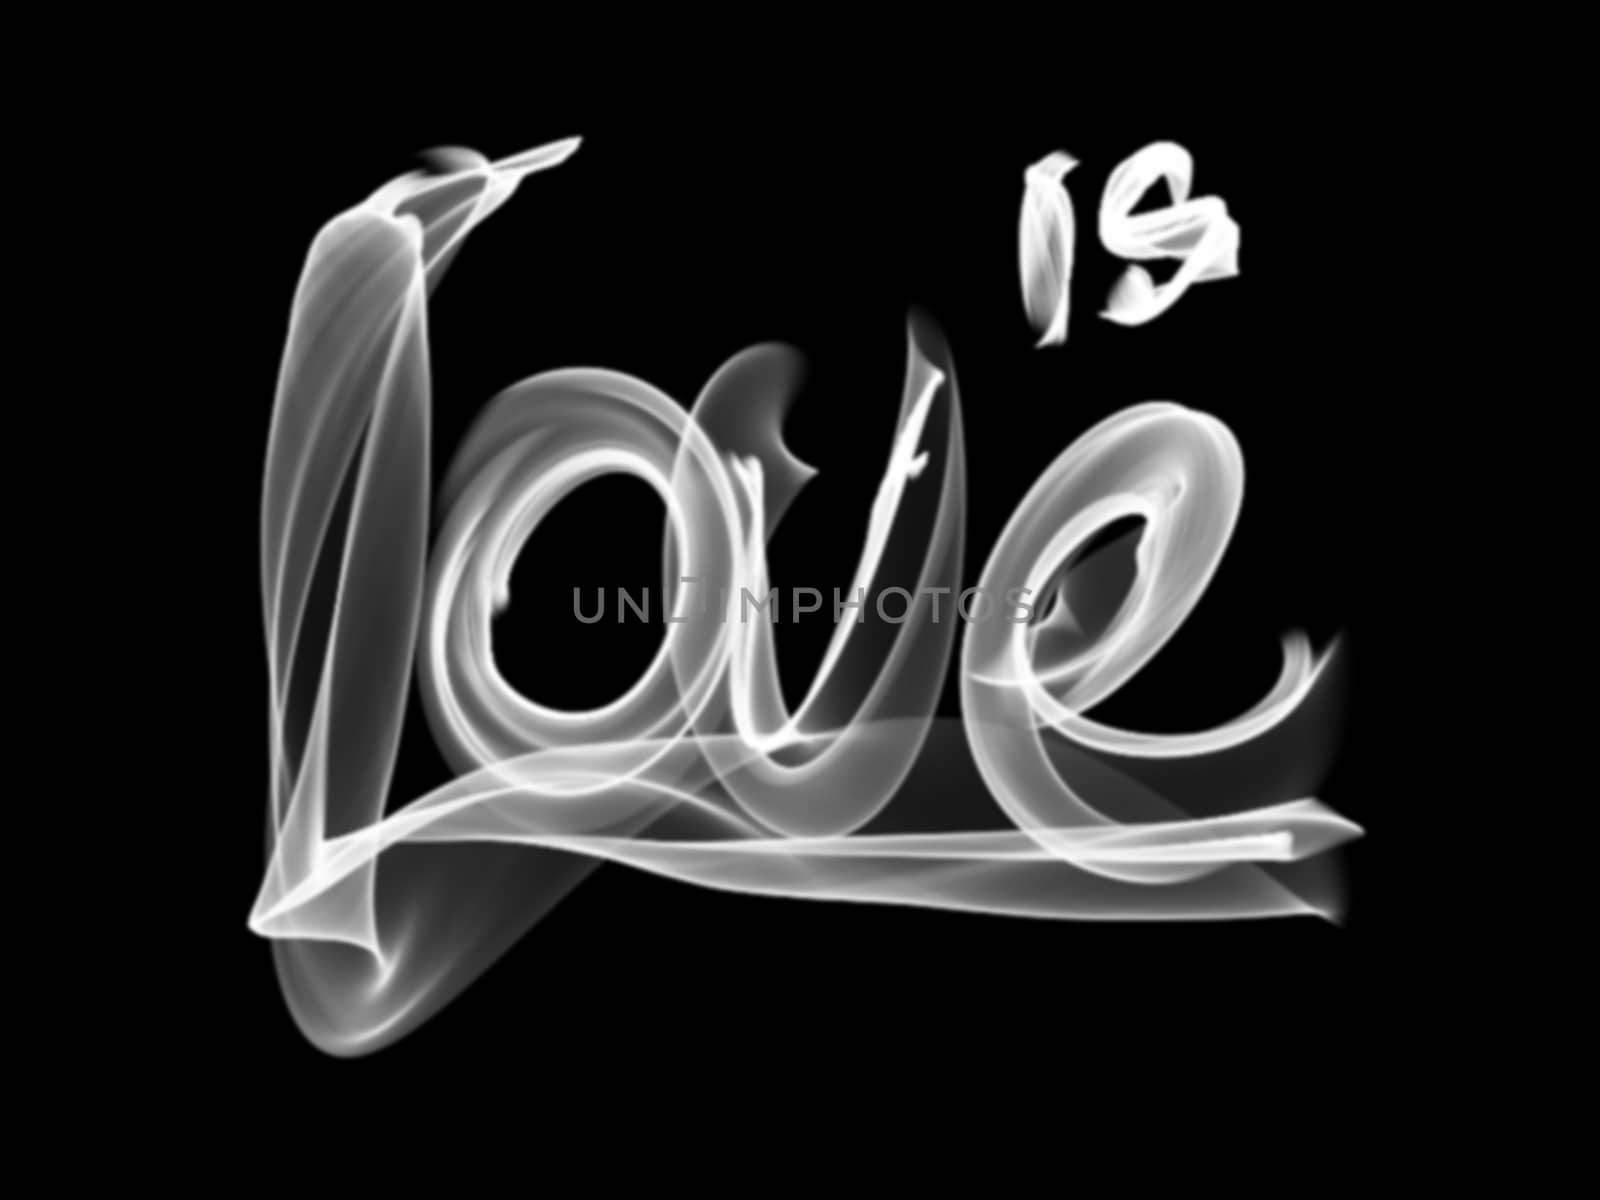 Love isolated word lettering and heart written with fire flame or smoke on black background.